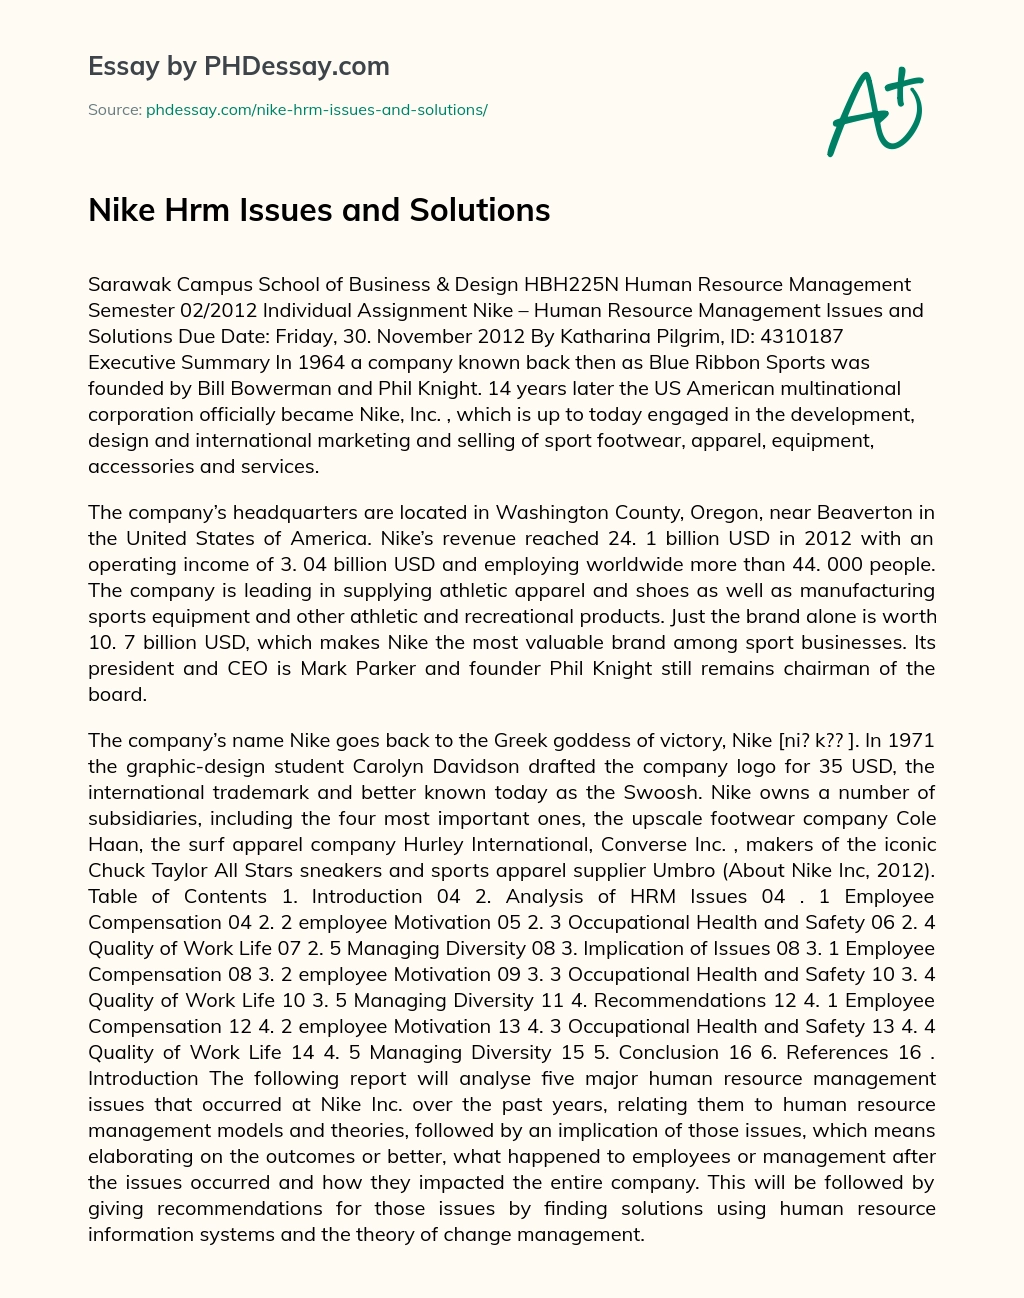 Nike Hrm Issues and Solutions essay